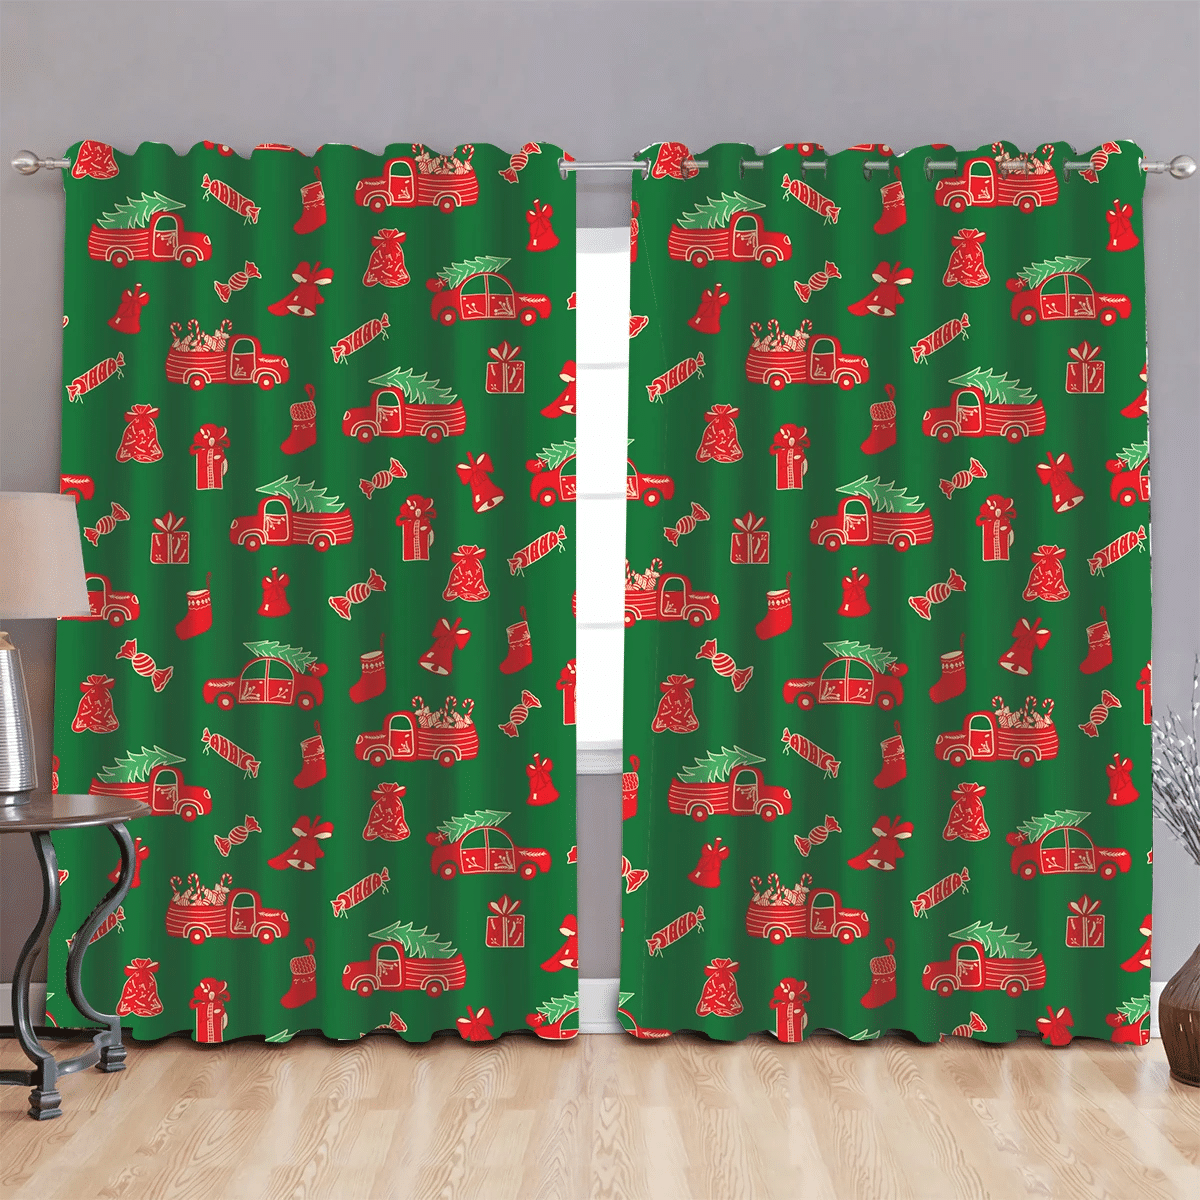 All Elements In Red Colors With Trucks Trees Socks And Candy Pattern Window Curtains Door Curtains Home Decor